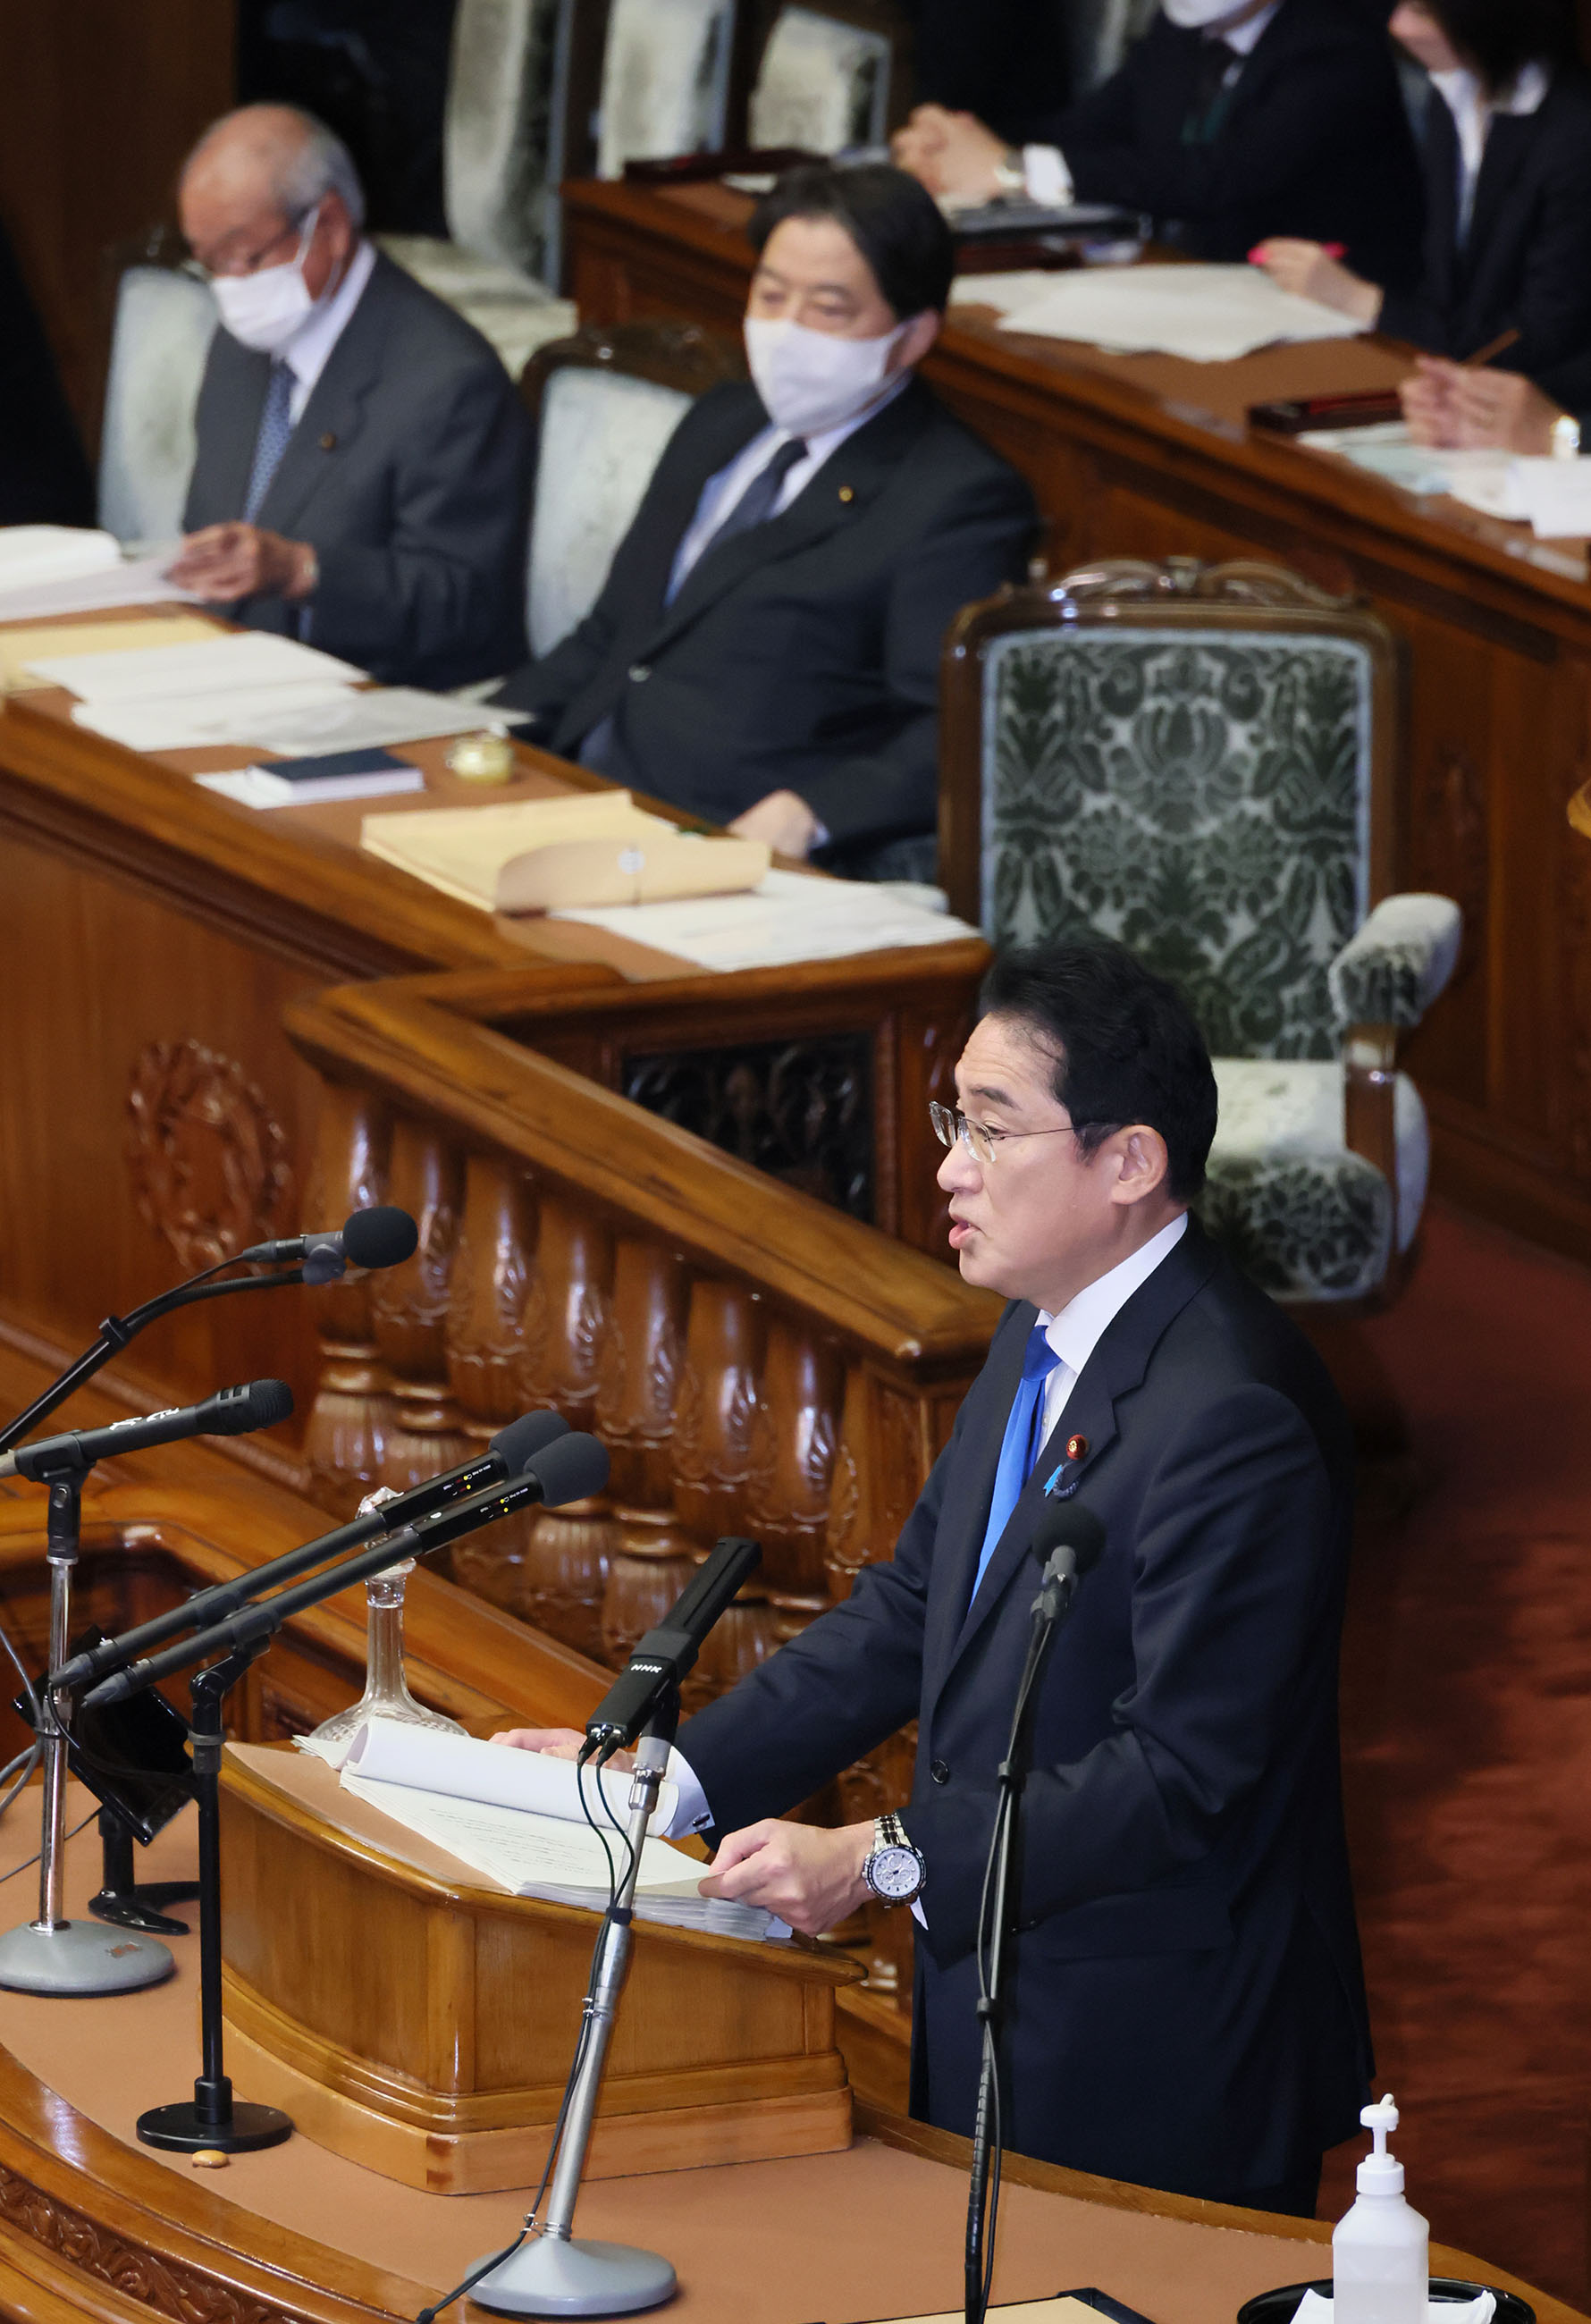 Prime Minister Kishida delivering a policy speech during the plenary session of the House of Representatives (7)